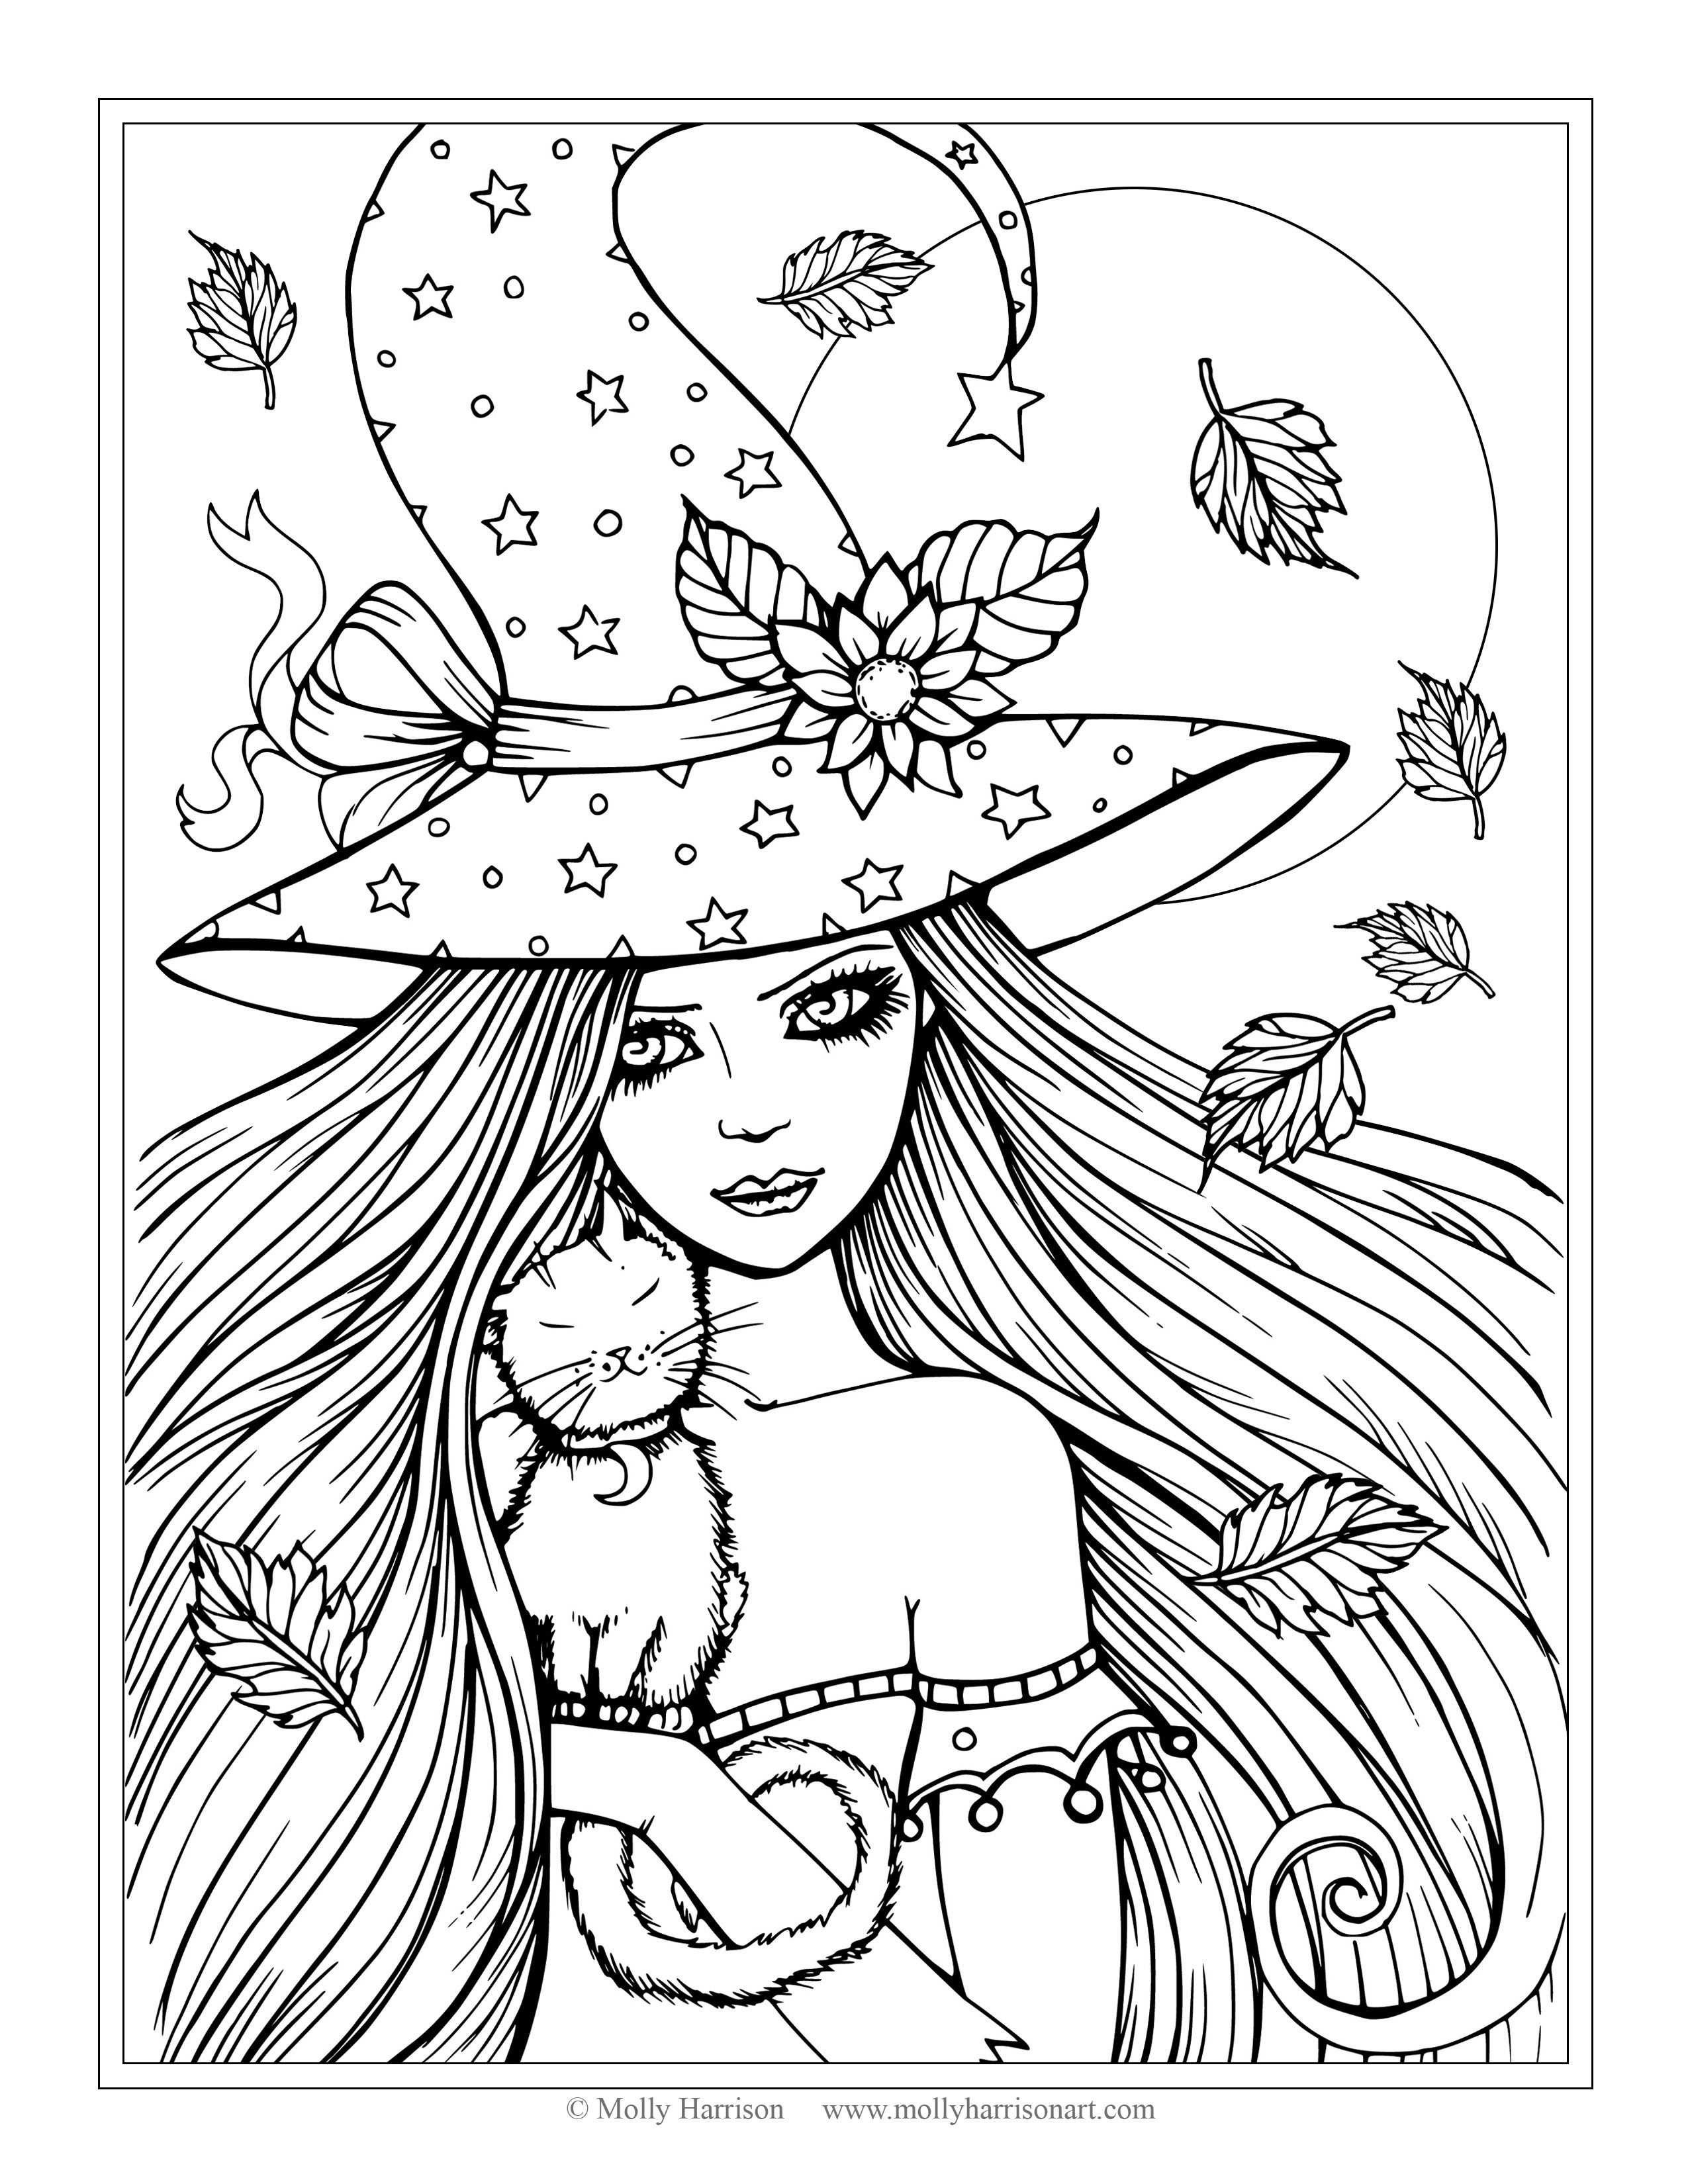 Free Cat Coloring Pages Inspirational Cool Coloring Page Unique Witch Coloring Pages New Crayola Pages 0d